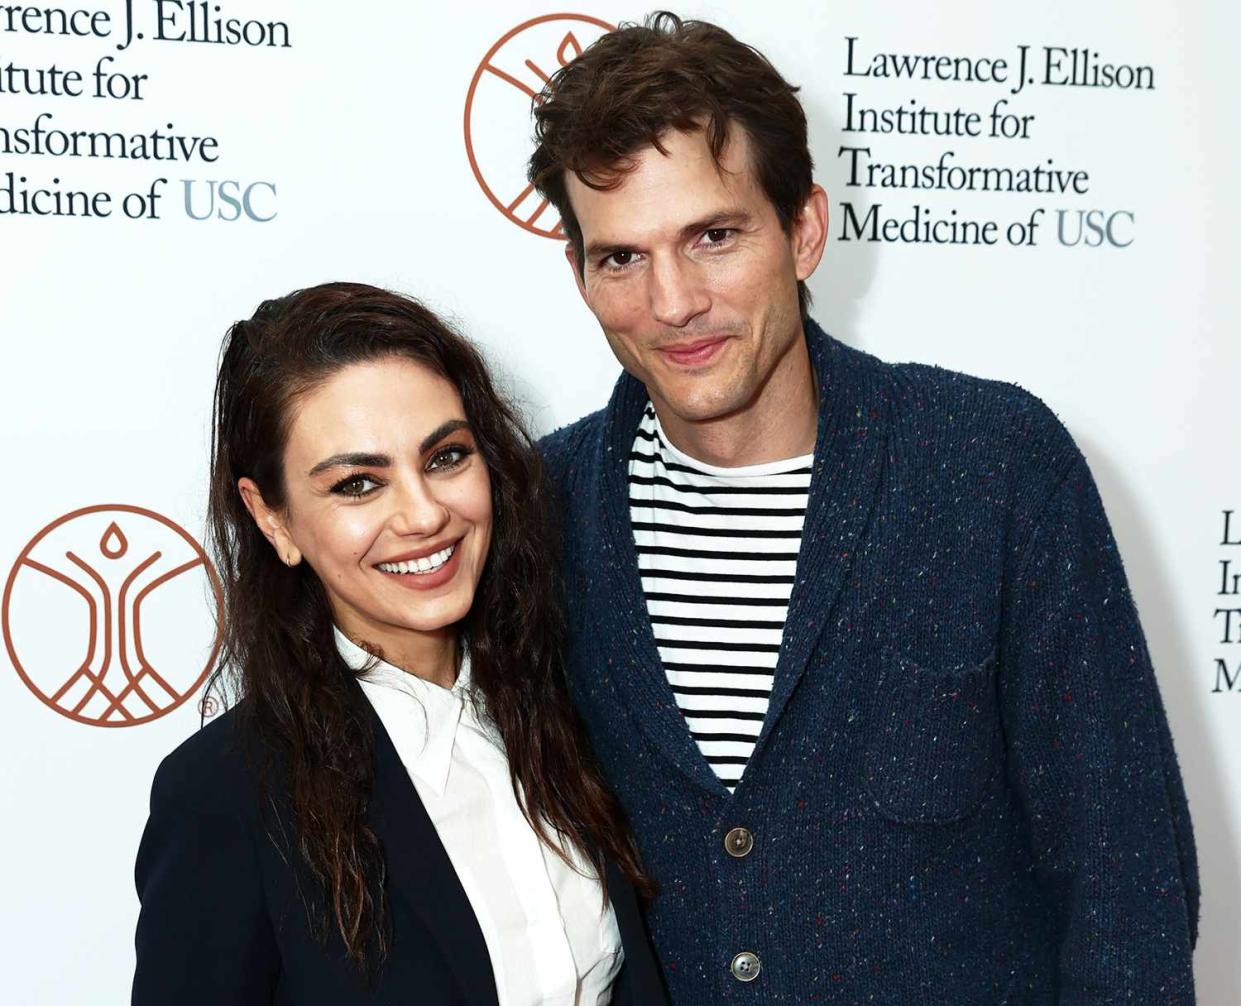 Mila Kunis and Ashton Kutcher attend the Grand Opening of the Lawrence J. Ellison Institute on September 28, 2021 in Los Angeles, California.